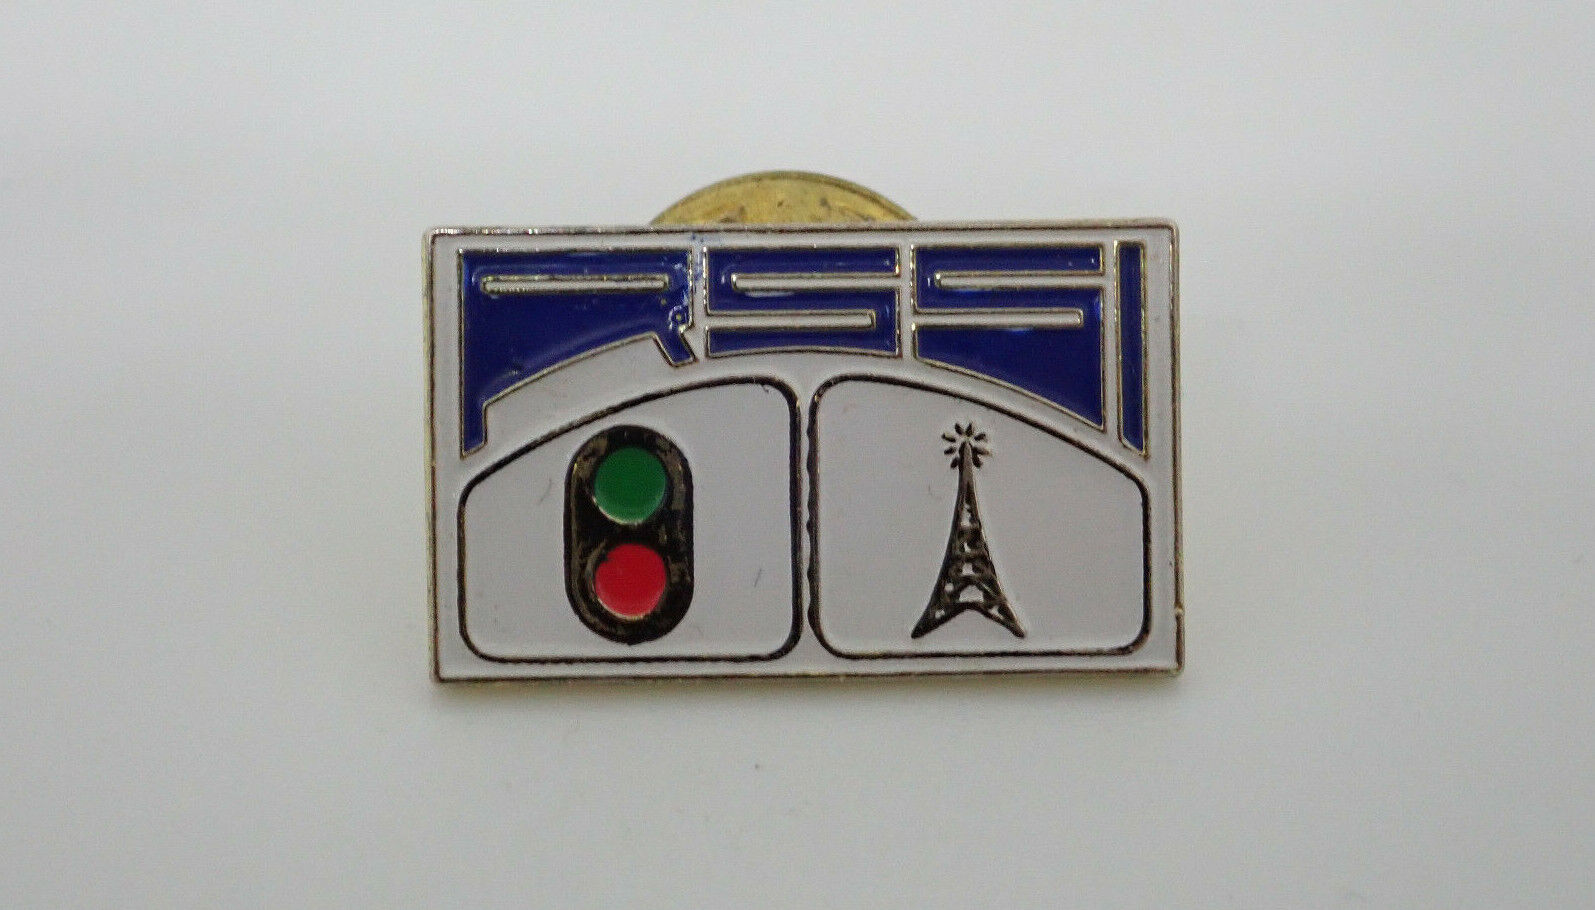  Railway Systems Suppliers Inc Logo Vintage Lapel Pin 